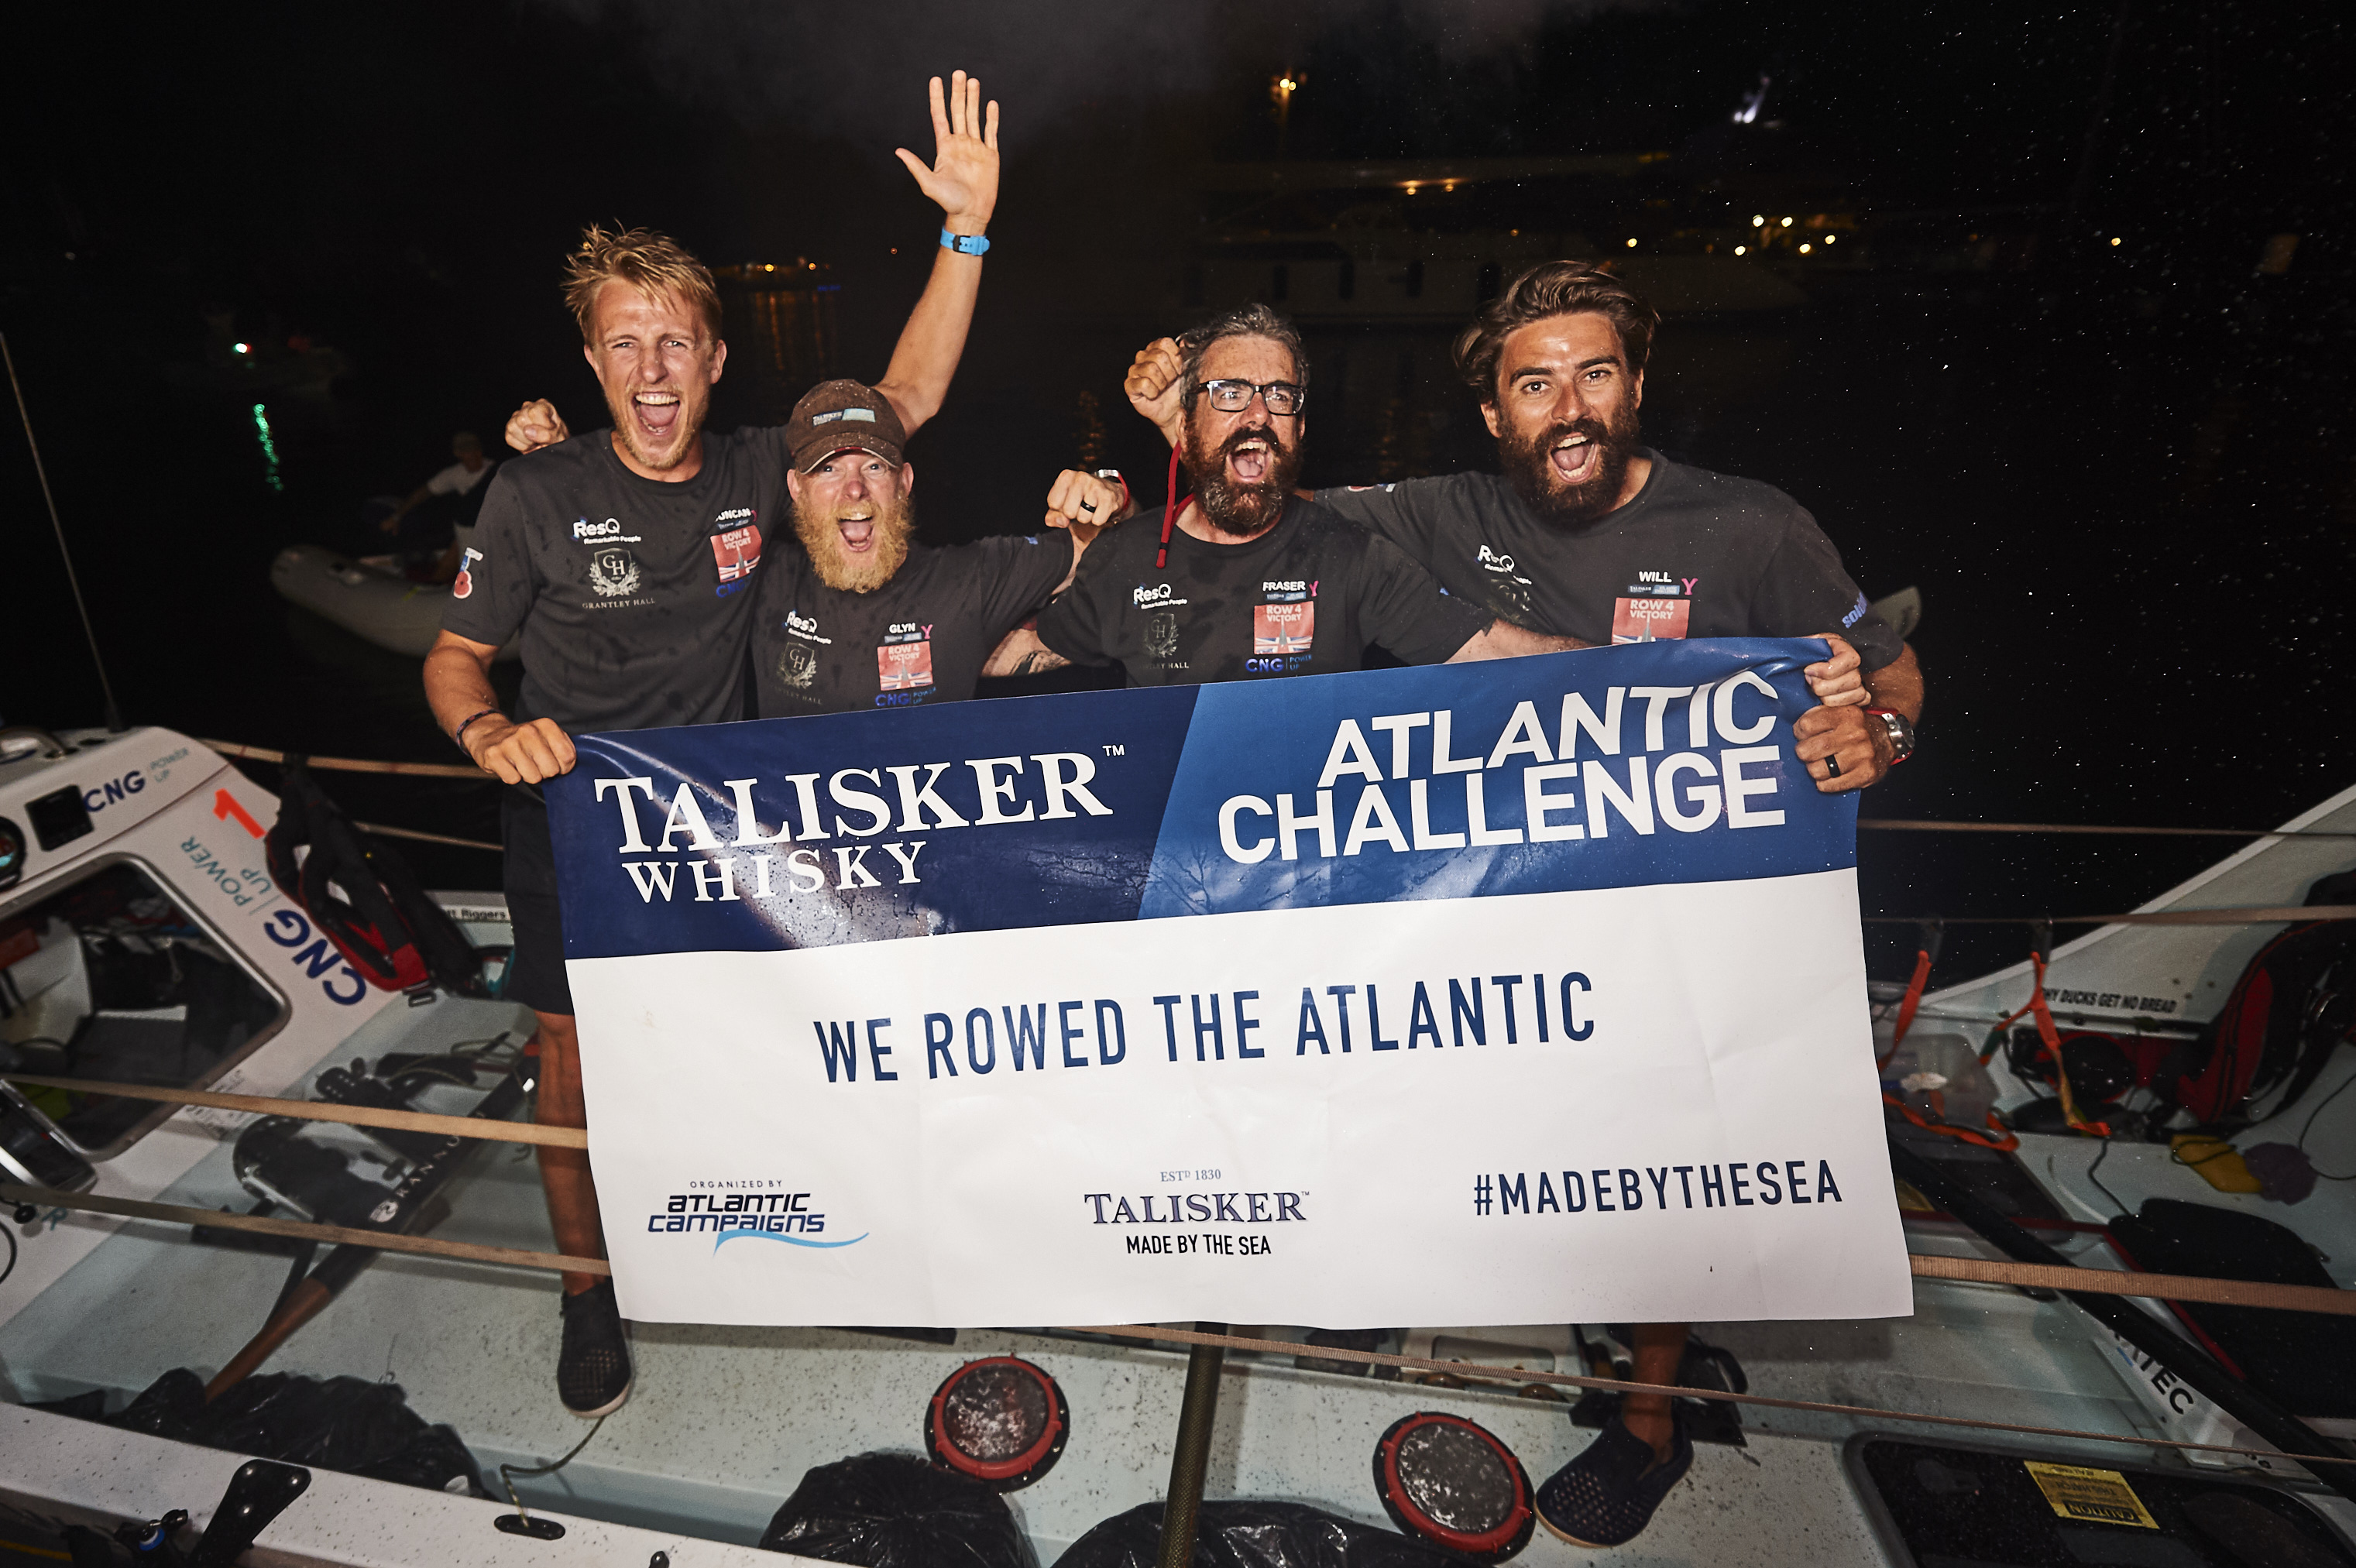 The Row4Victory team (left to right: Duncan Roy, Glyn Sadler, Fraser Mowlam, Will Quarmby) completed the 3,000-mile trans-Atlantic rowing race, the Talisker Whisky Atlantic Challenge, in fifth place (Talisker Whisky Atlantic Challenge/PA)